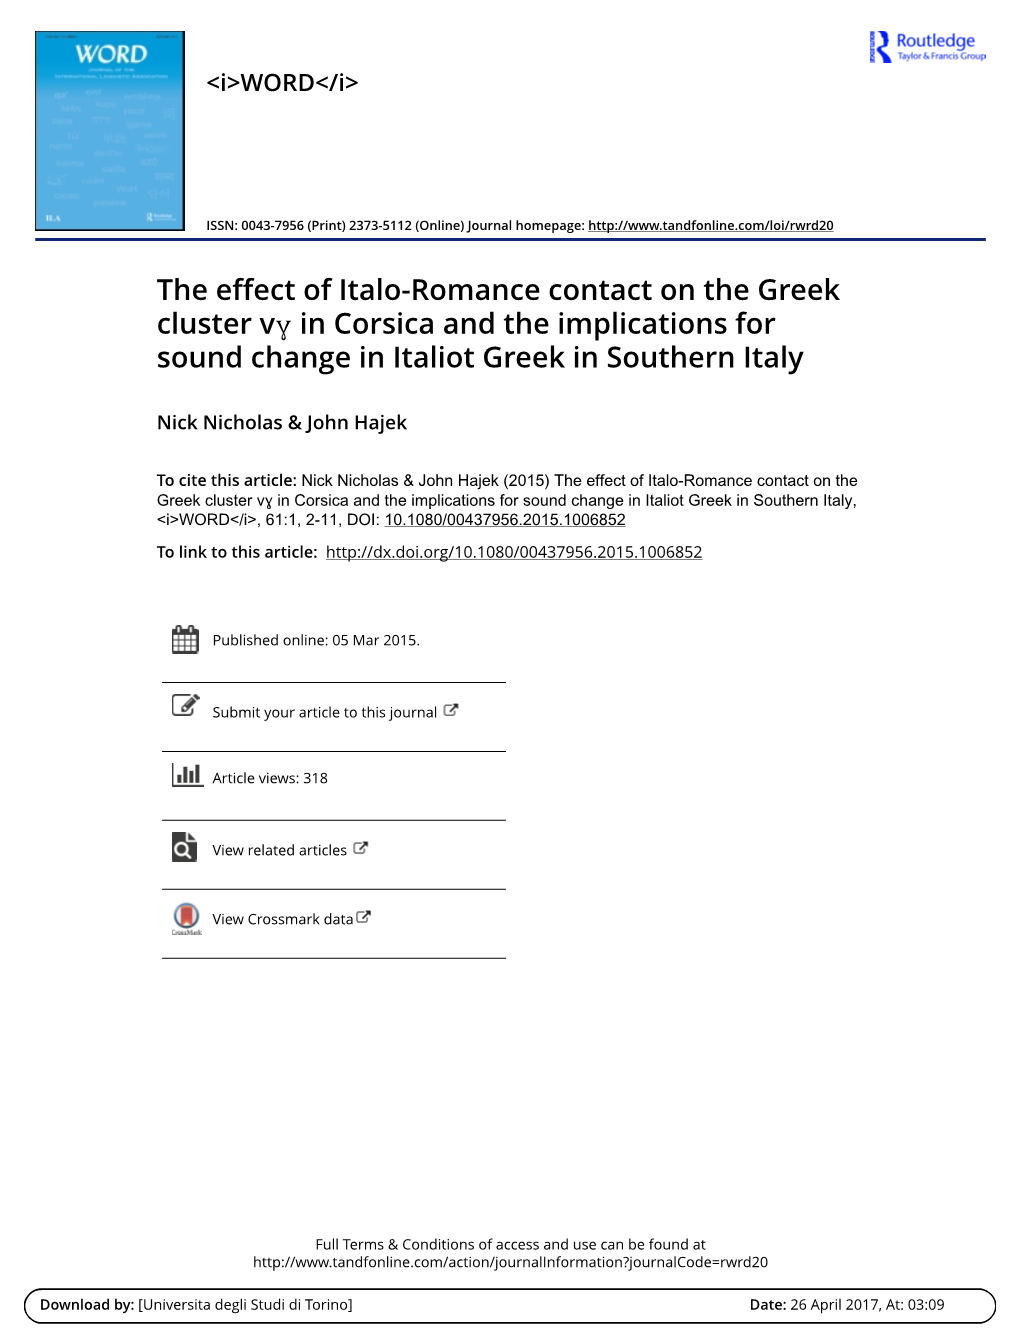 The Effect of Italo-Romance Contact on the Greek Cluster Vɣ in Corsica and the Implications for Sound Change in Italiot Greek in Southern Italy